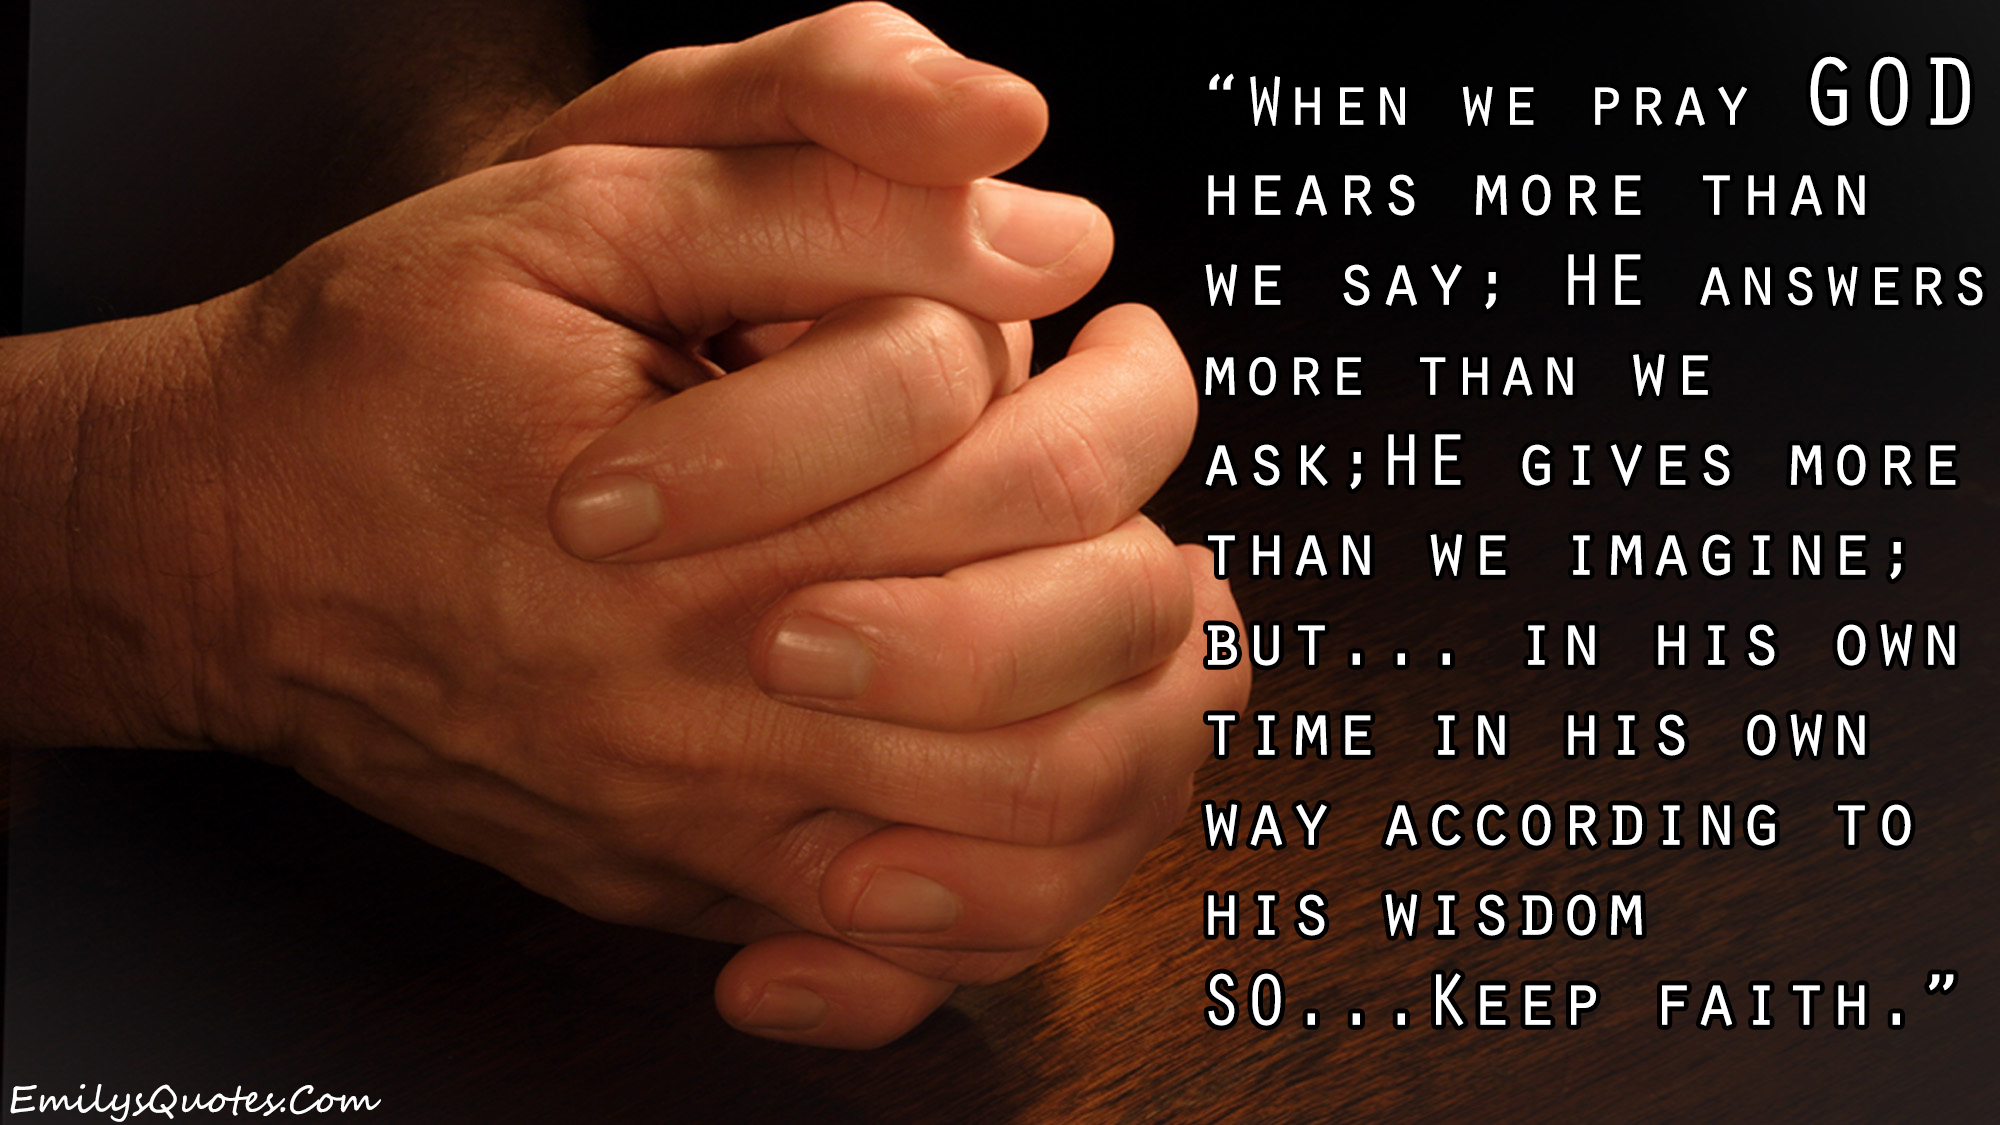 When we pray GOD hears more than we say; HE answers more than we ask; HE gives more than we imagine; but….